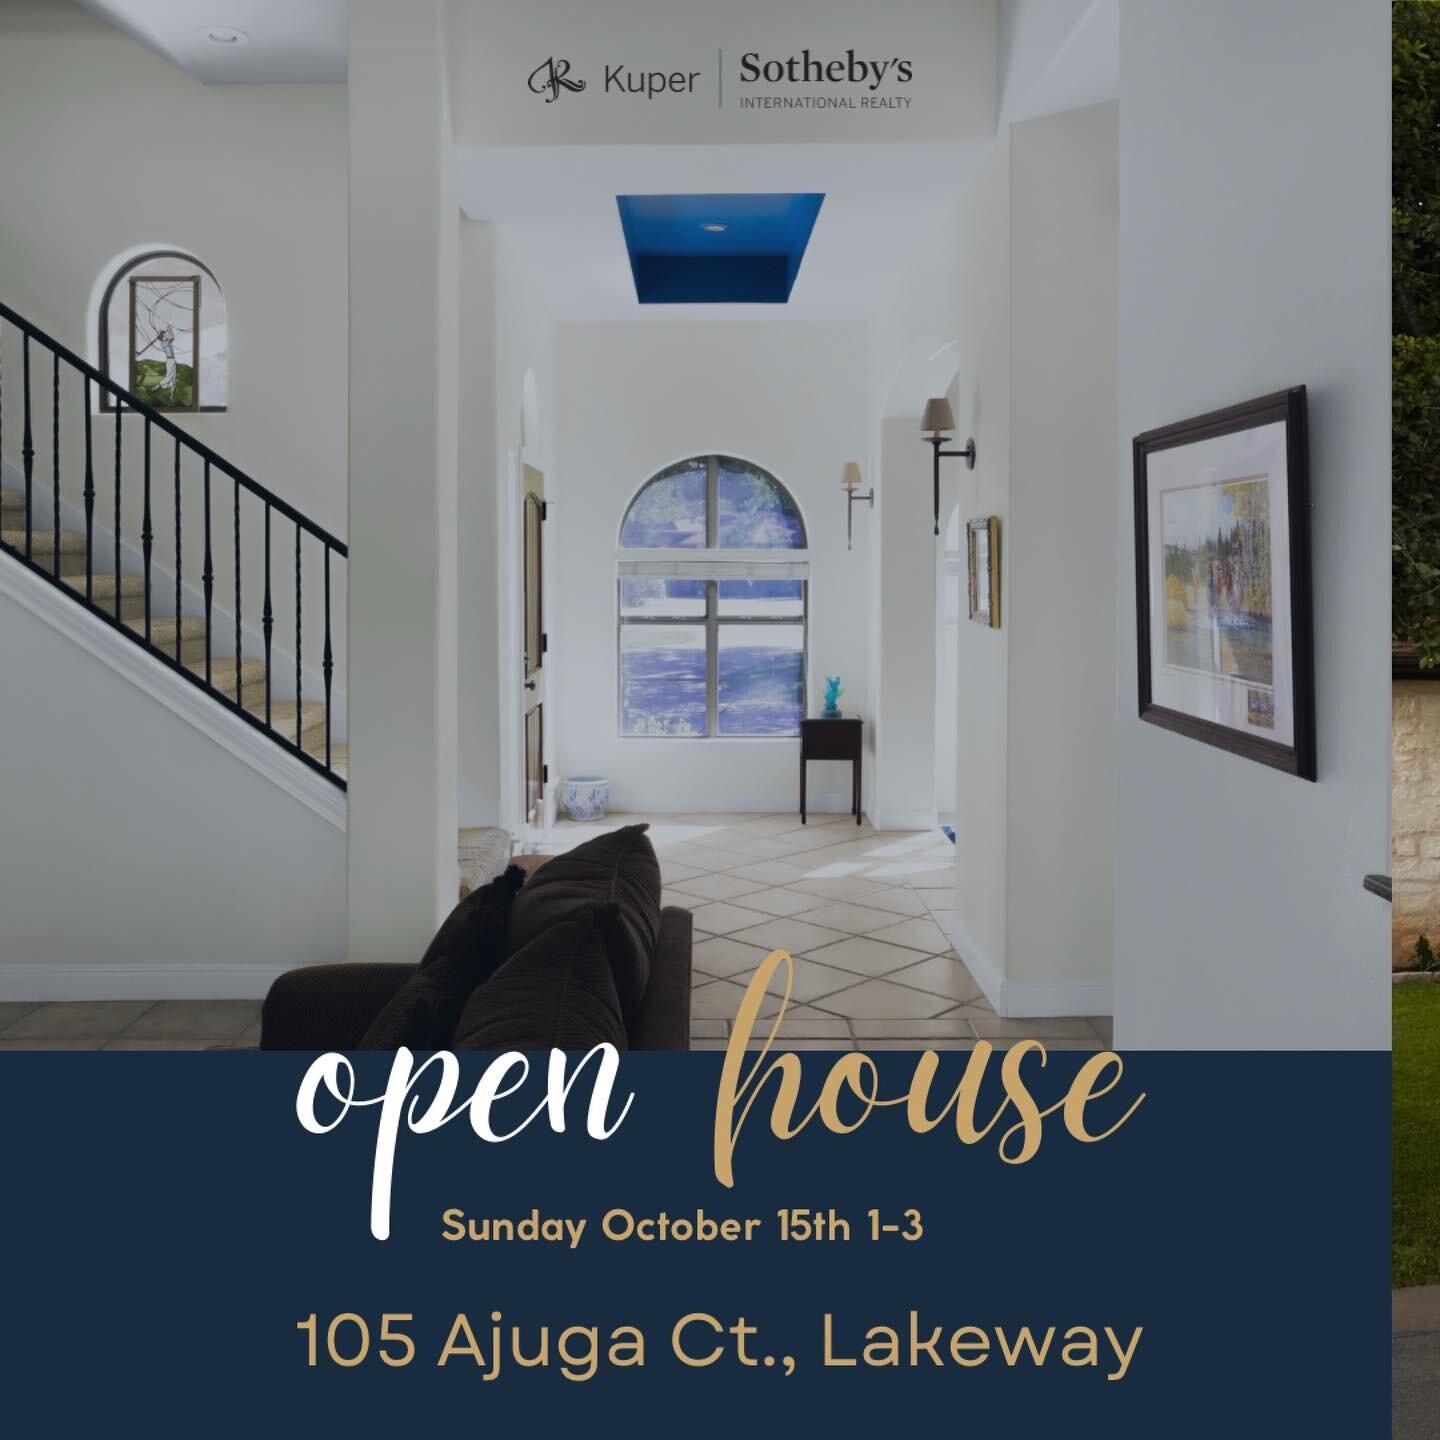 💥𝐎𝐩𝐞𝐧 𝐇𝐨𝐮𝐬𝐞💥
🗓️ Sunday October 15
🕐 1-3
📍105 Ajuga Ct., Lakeway 
&bull;
While you&rsquo;re out and about on Sunday enjoying this awesome #fallweather 🍁, stop by and check out our listing in Old Lakeway. 
&bull;
𝐎𝐟𝐟𝐞𝐫𝐞𝐝 𝐚𝐭 $𝟕?